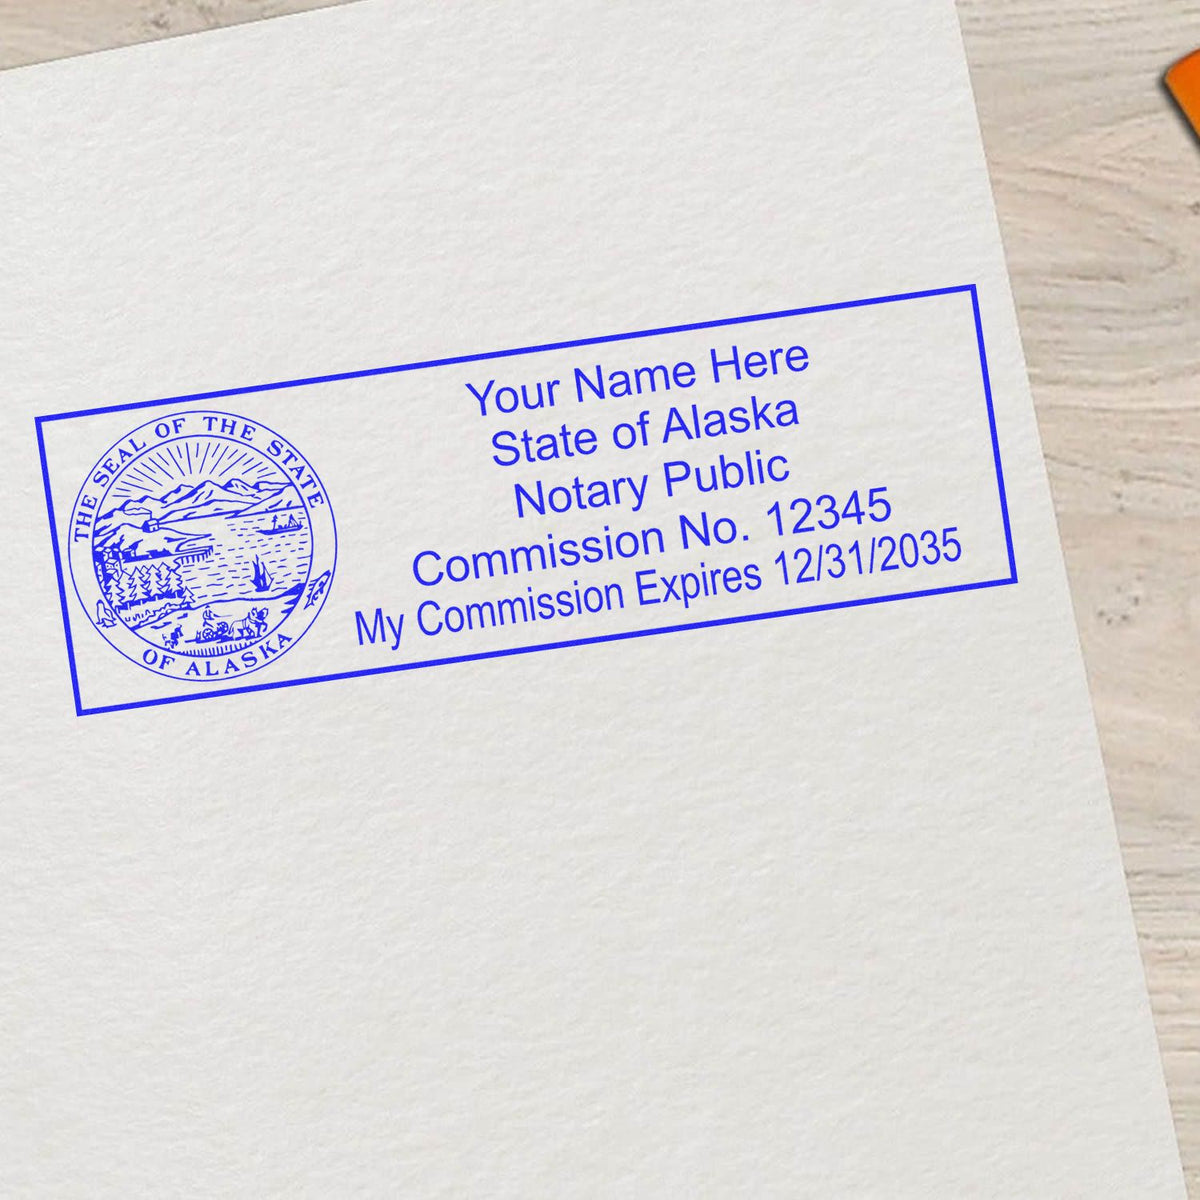 A lifestyle photo showing a stamped image of the Wooden Handle Alaska State Seal Notary Public Stamp on a piece of paper